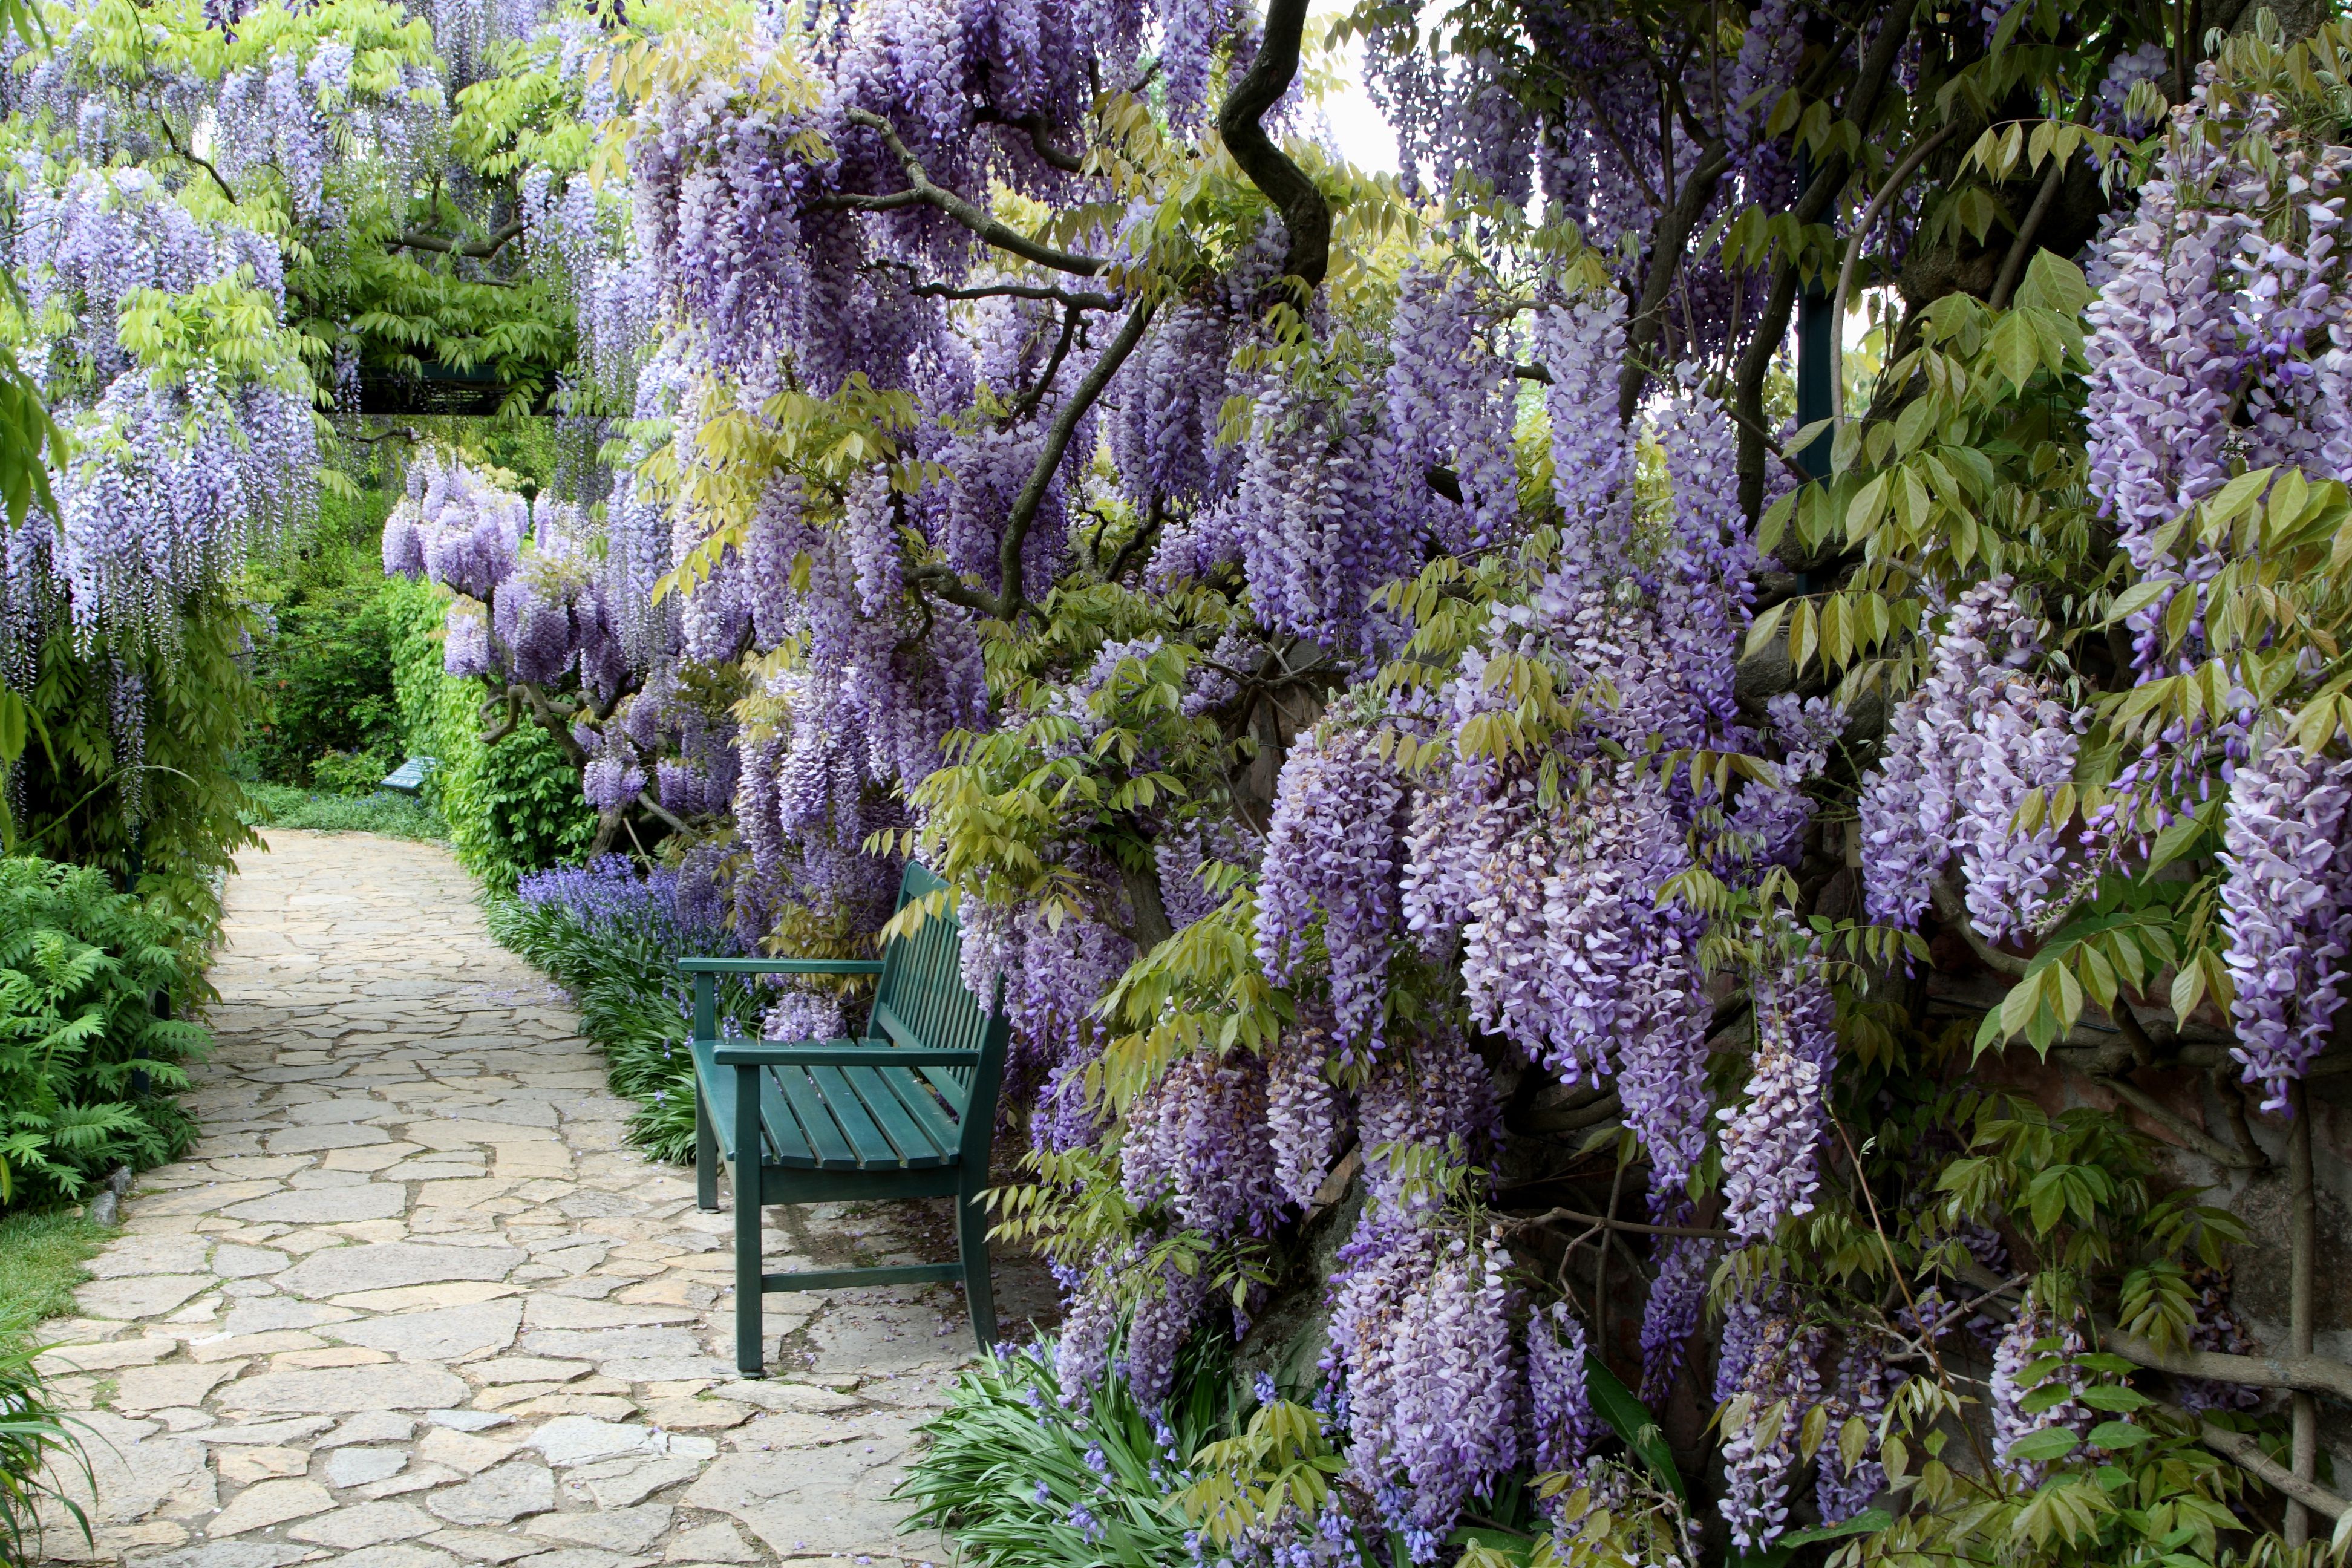 Japanese wisteria alongside garden path and bench